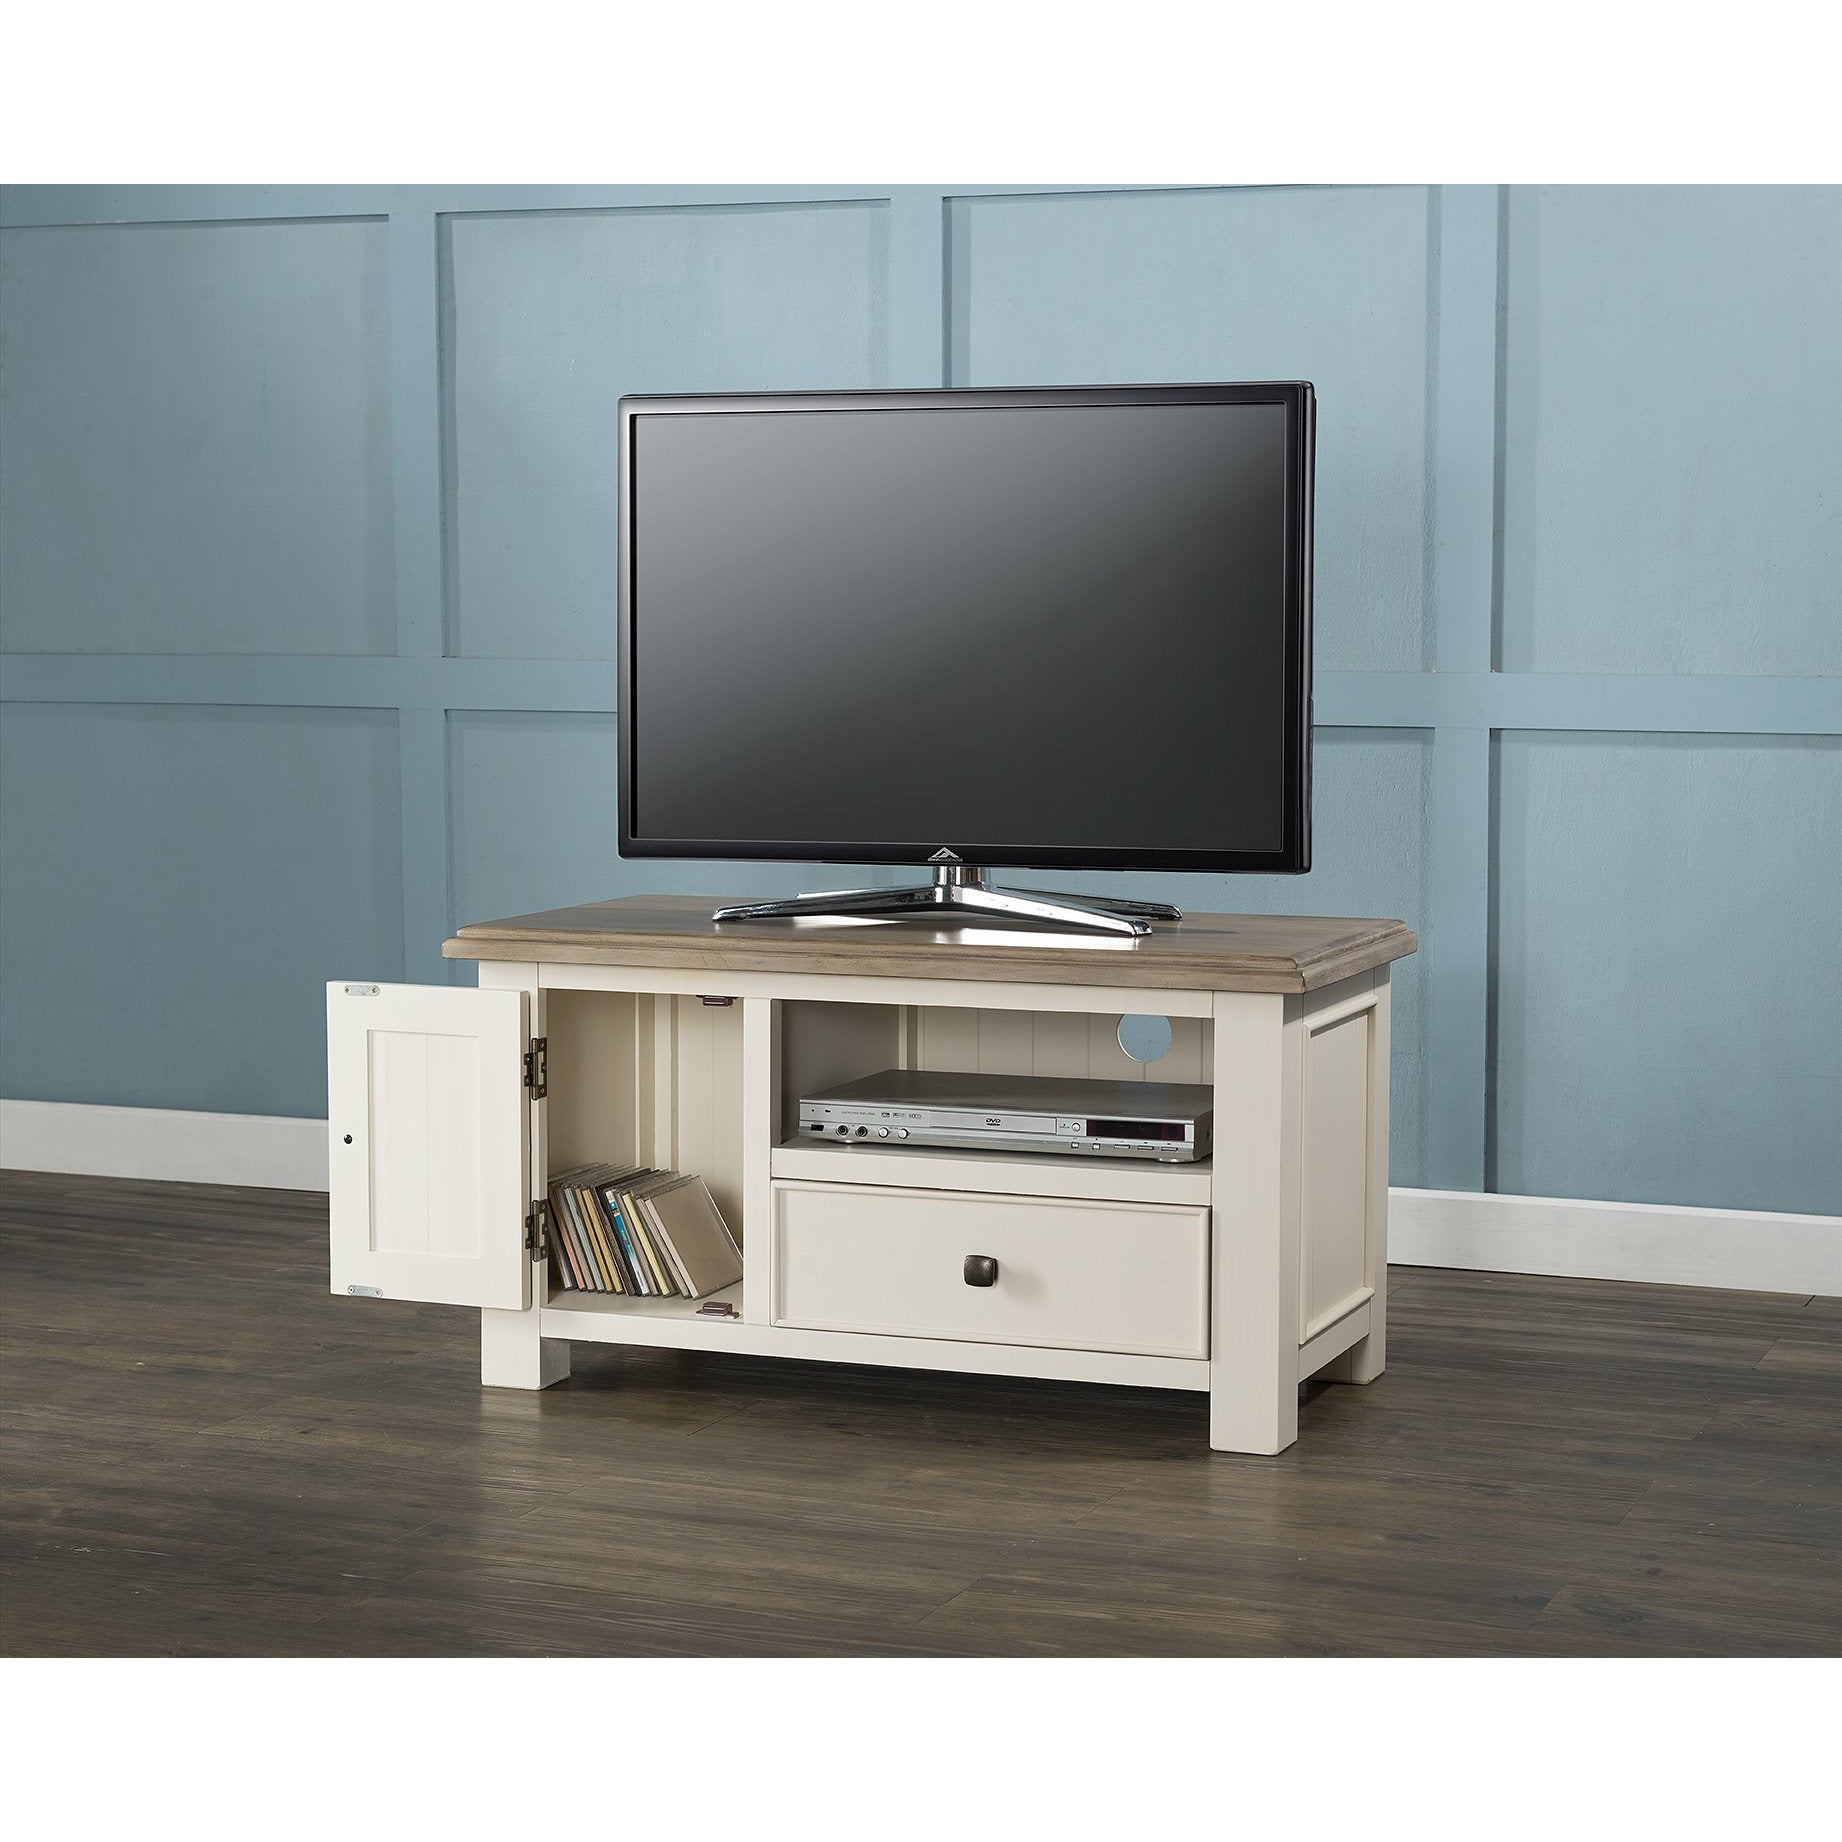 Portland Standard TV Unit from Upstairs Downstairs Furniture in Lisburn, Monaghan and Enniskillen